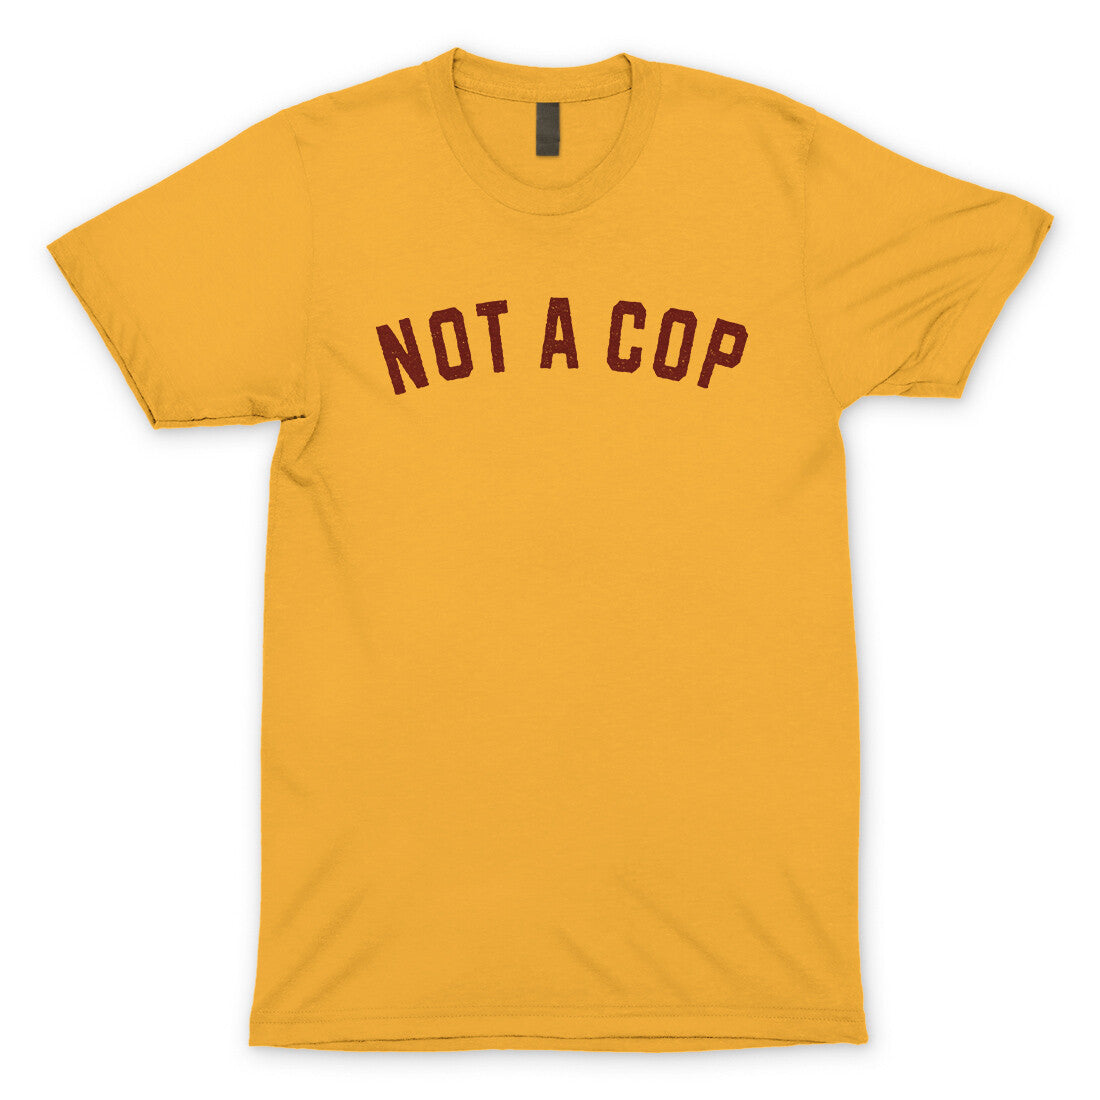 Not a Cop in Gold Color